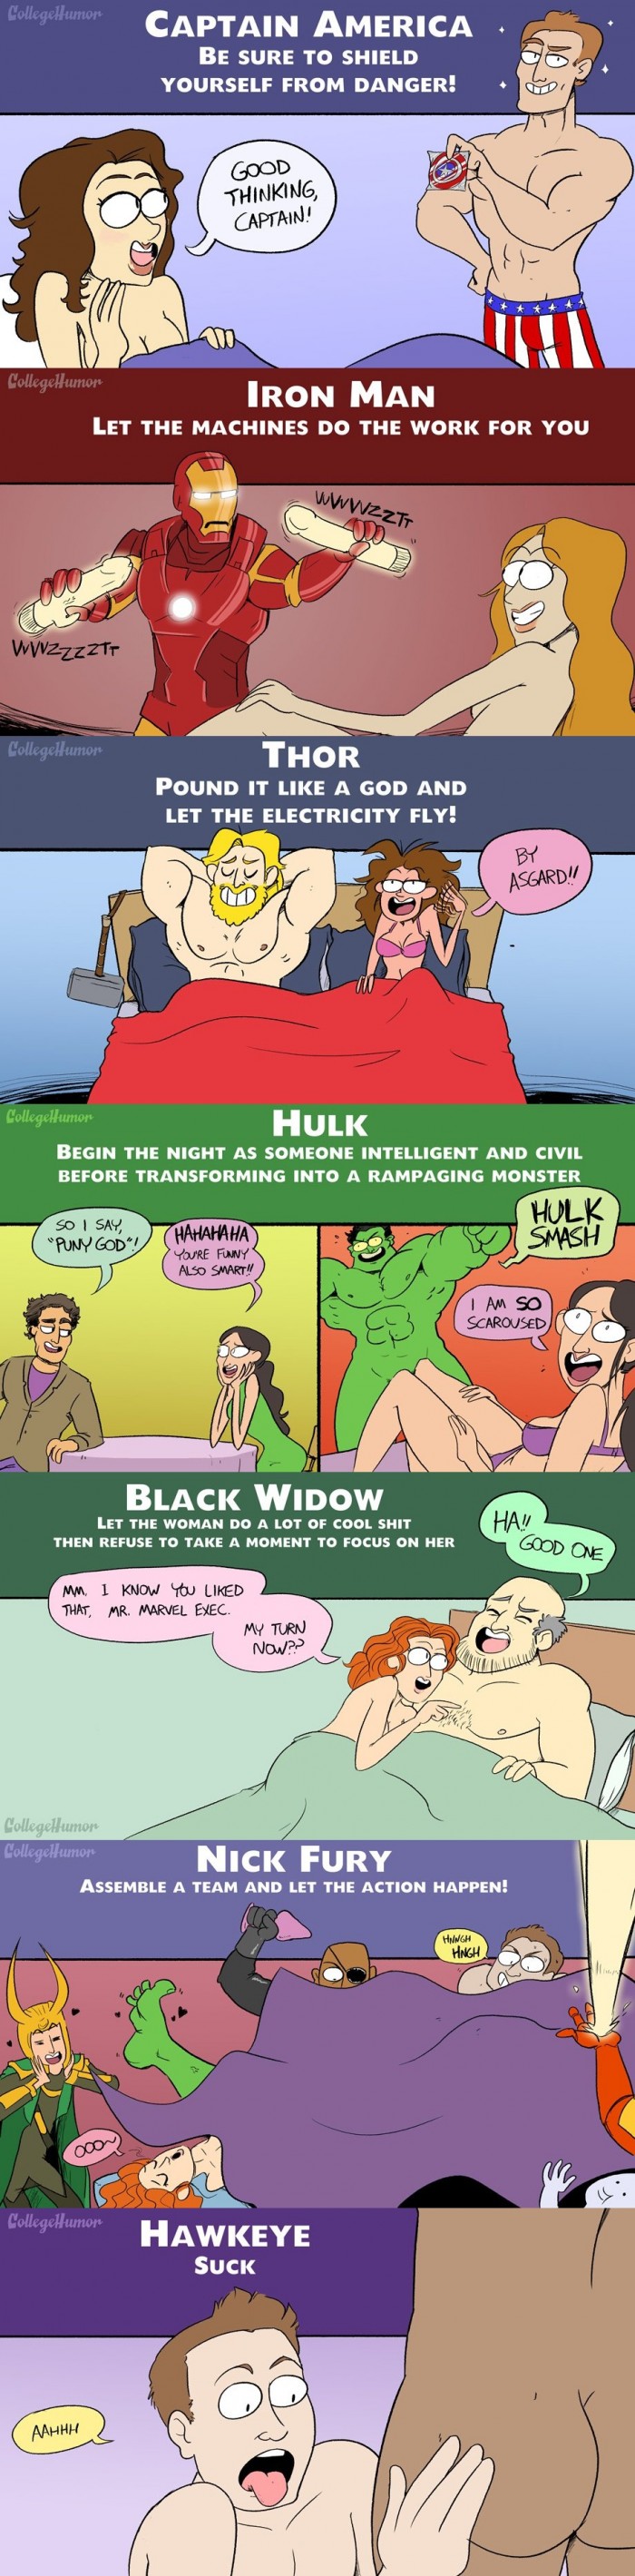 The Avengers in Bed.jpeg